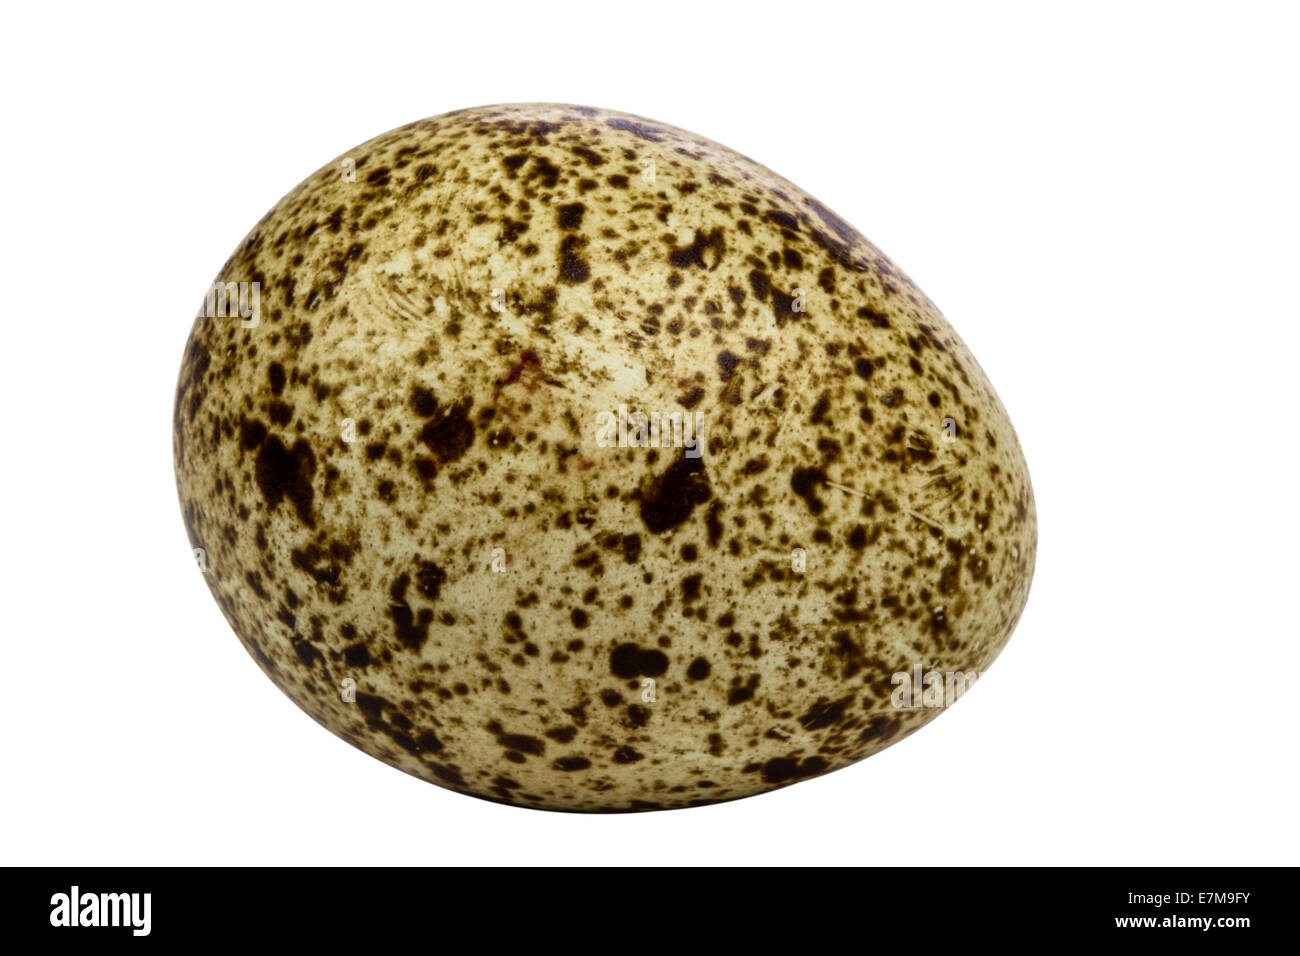 One quail egg isolated on white background with clipping path Stock Photo